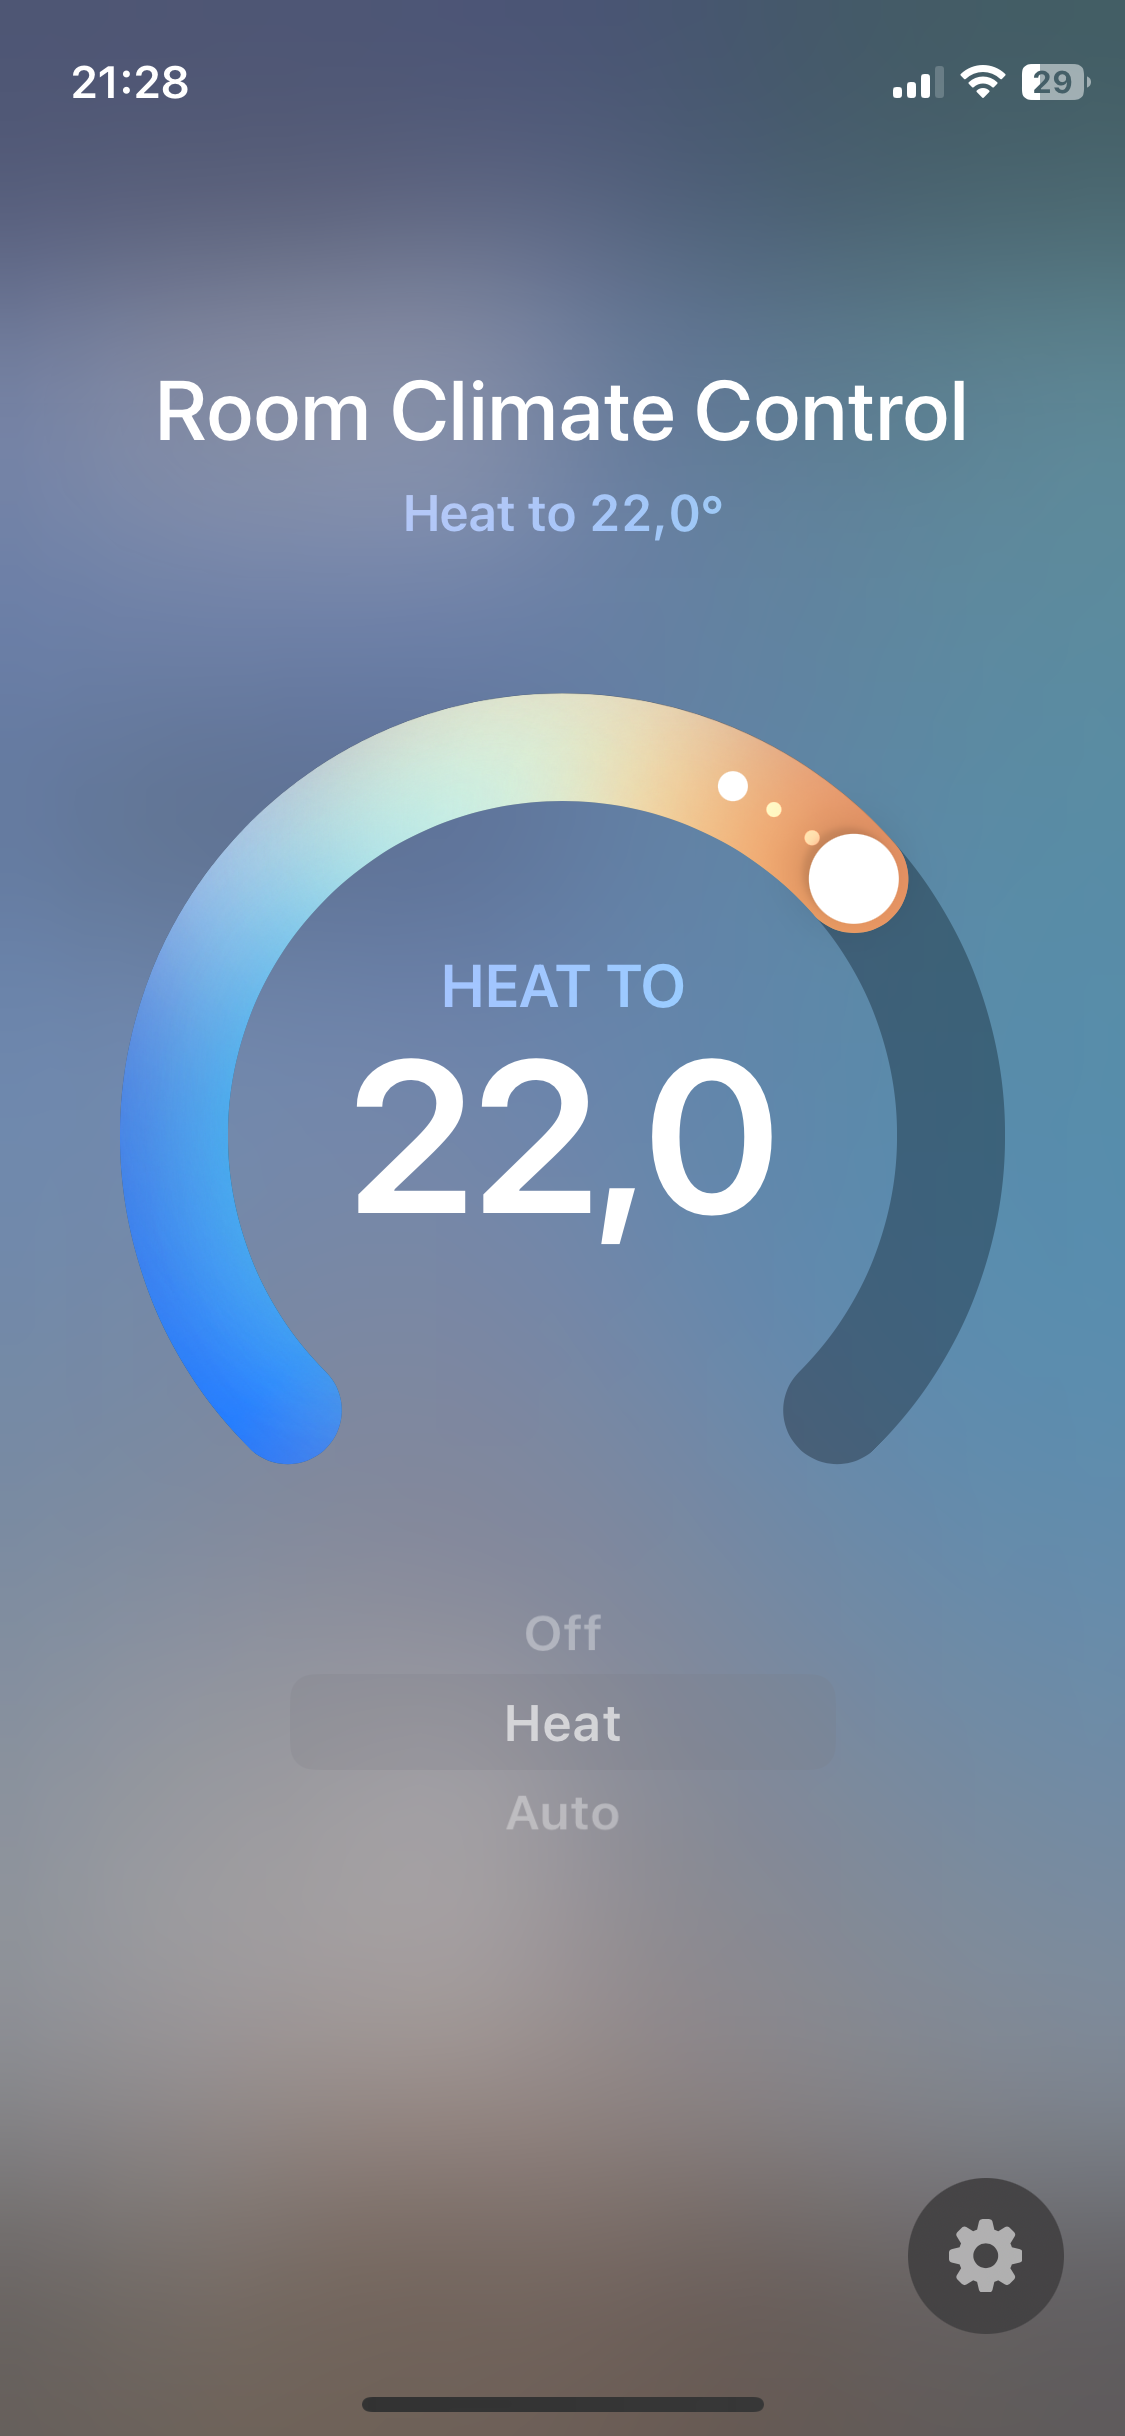 HomeKit integration for Bosch room climate control